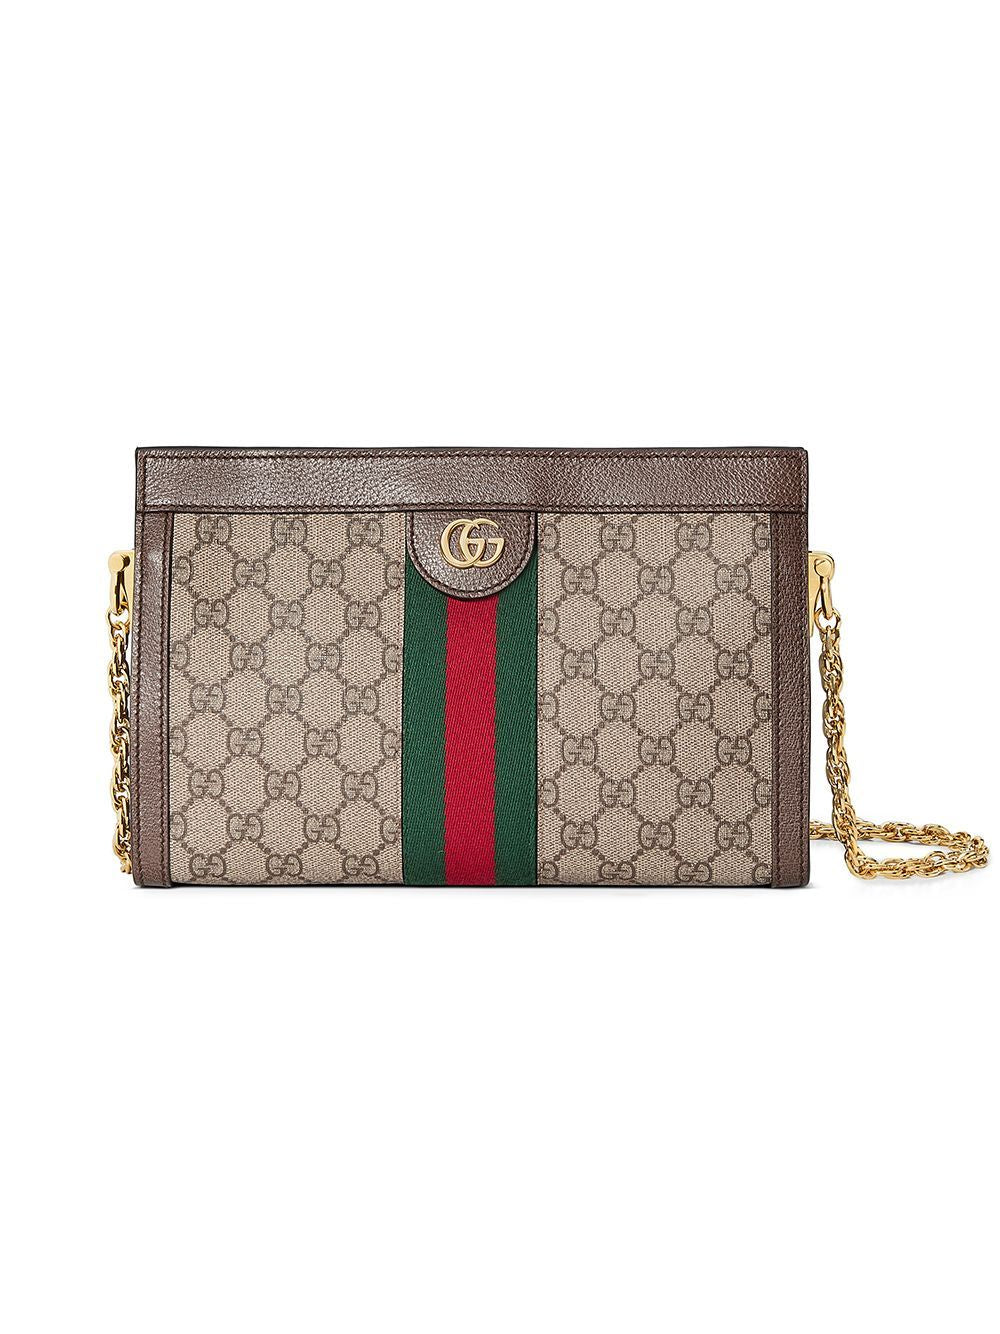 GUCCI Mini Ophidia GG Supreme Canvas Shoulder Bag in Tan with Chain Strap and Iconic Web Detail 26x17.5x8cm